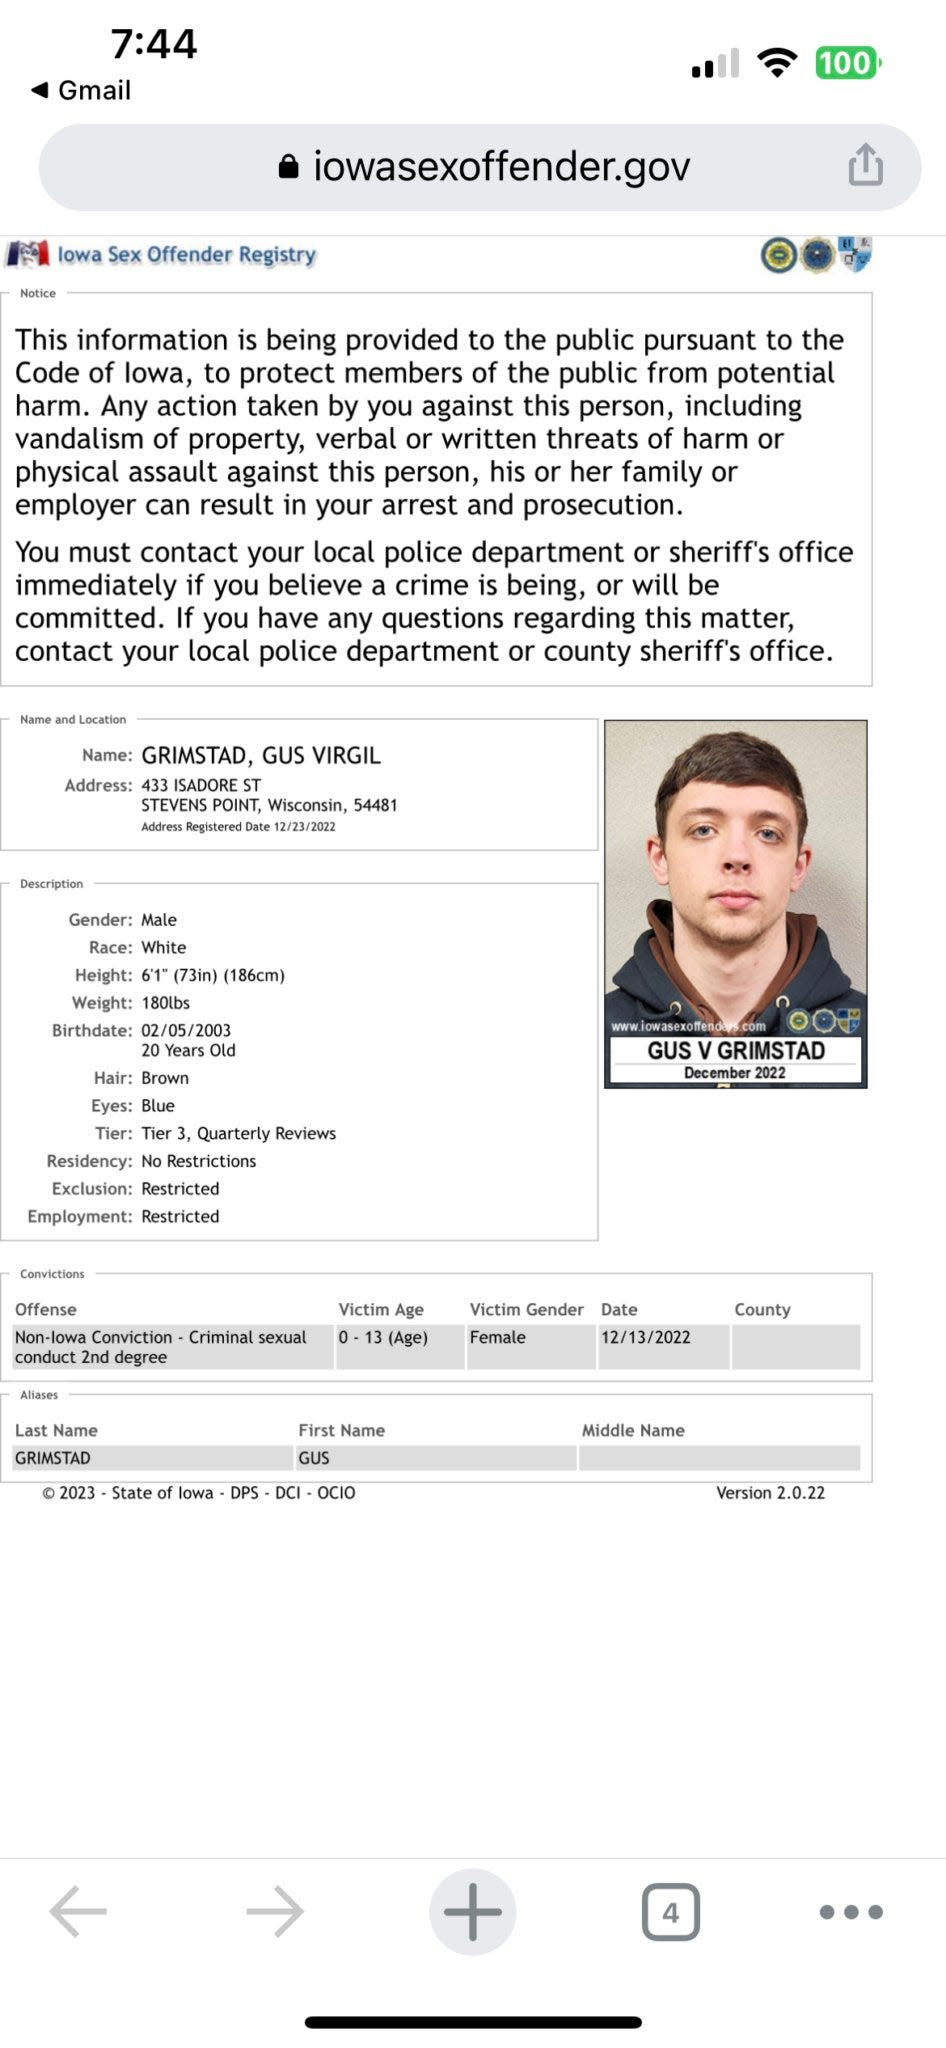 A screenshot captured Gus Grimstad's page on the Iowa Sex Offender Registry in January 2023.